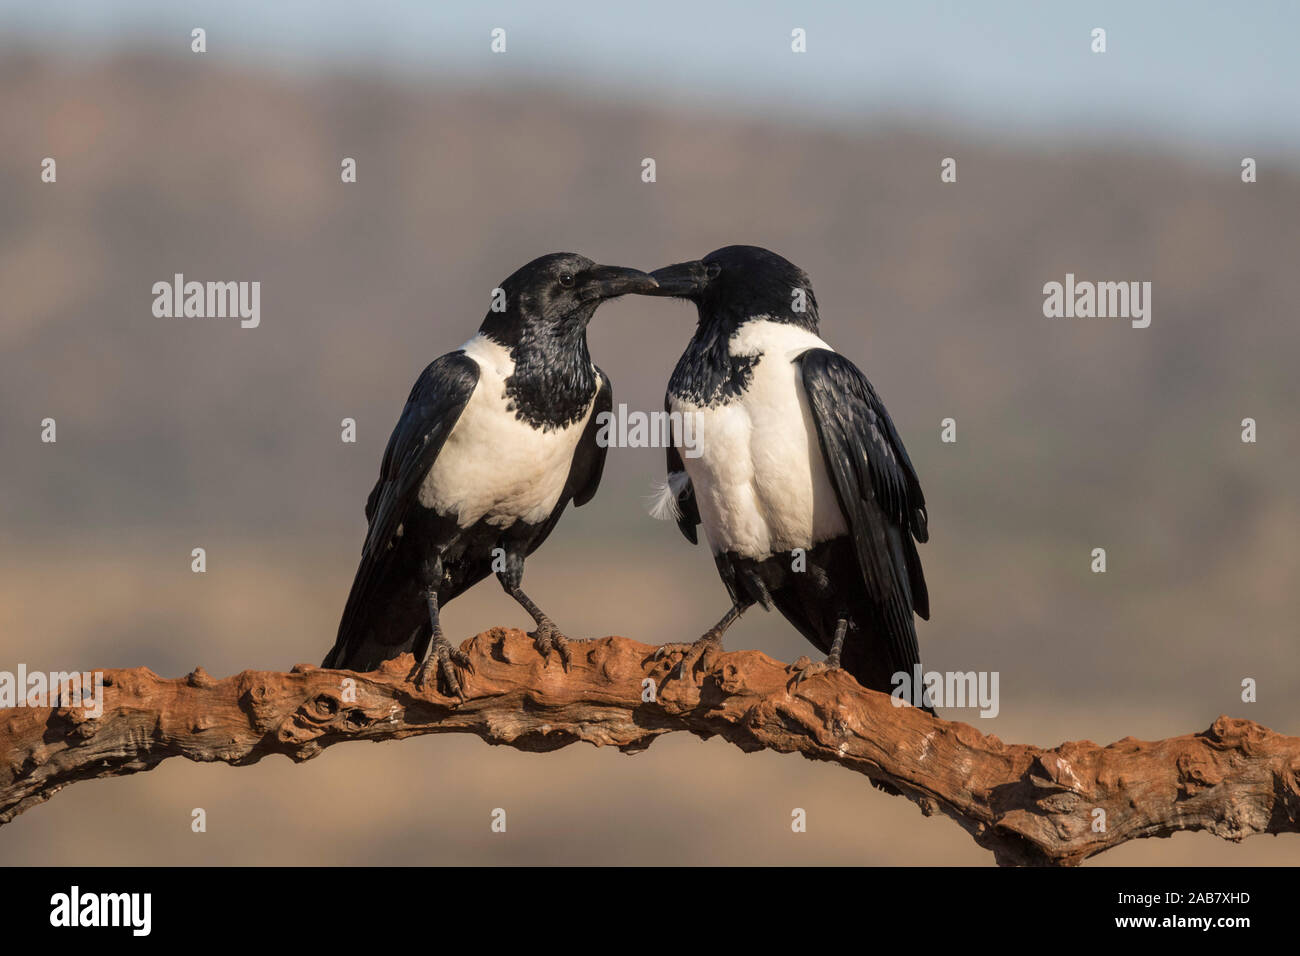 Pied crows (Corvus albus), Zimanga private game reserve, KwaZulu-Natal, South Africa, Africa Stock Photo